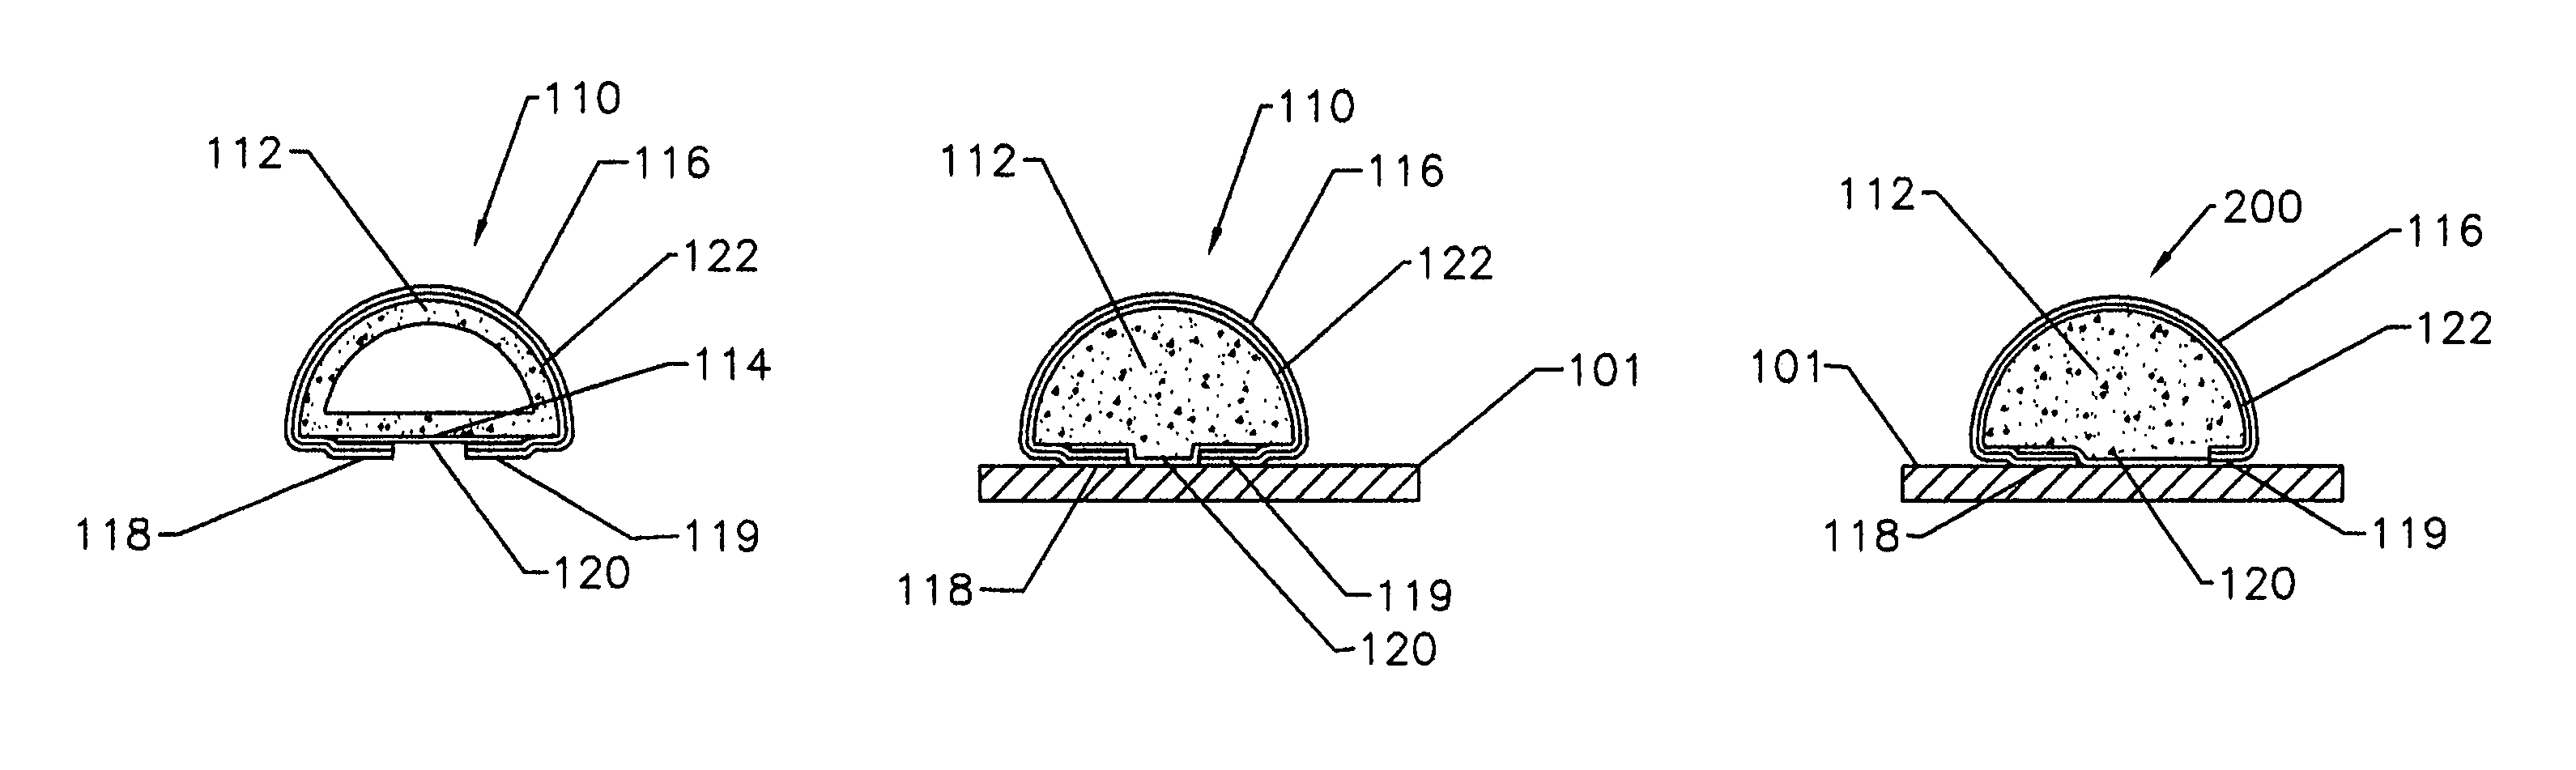 Electrically conductive gasket